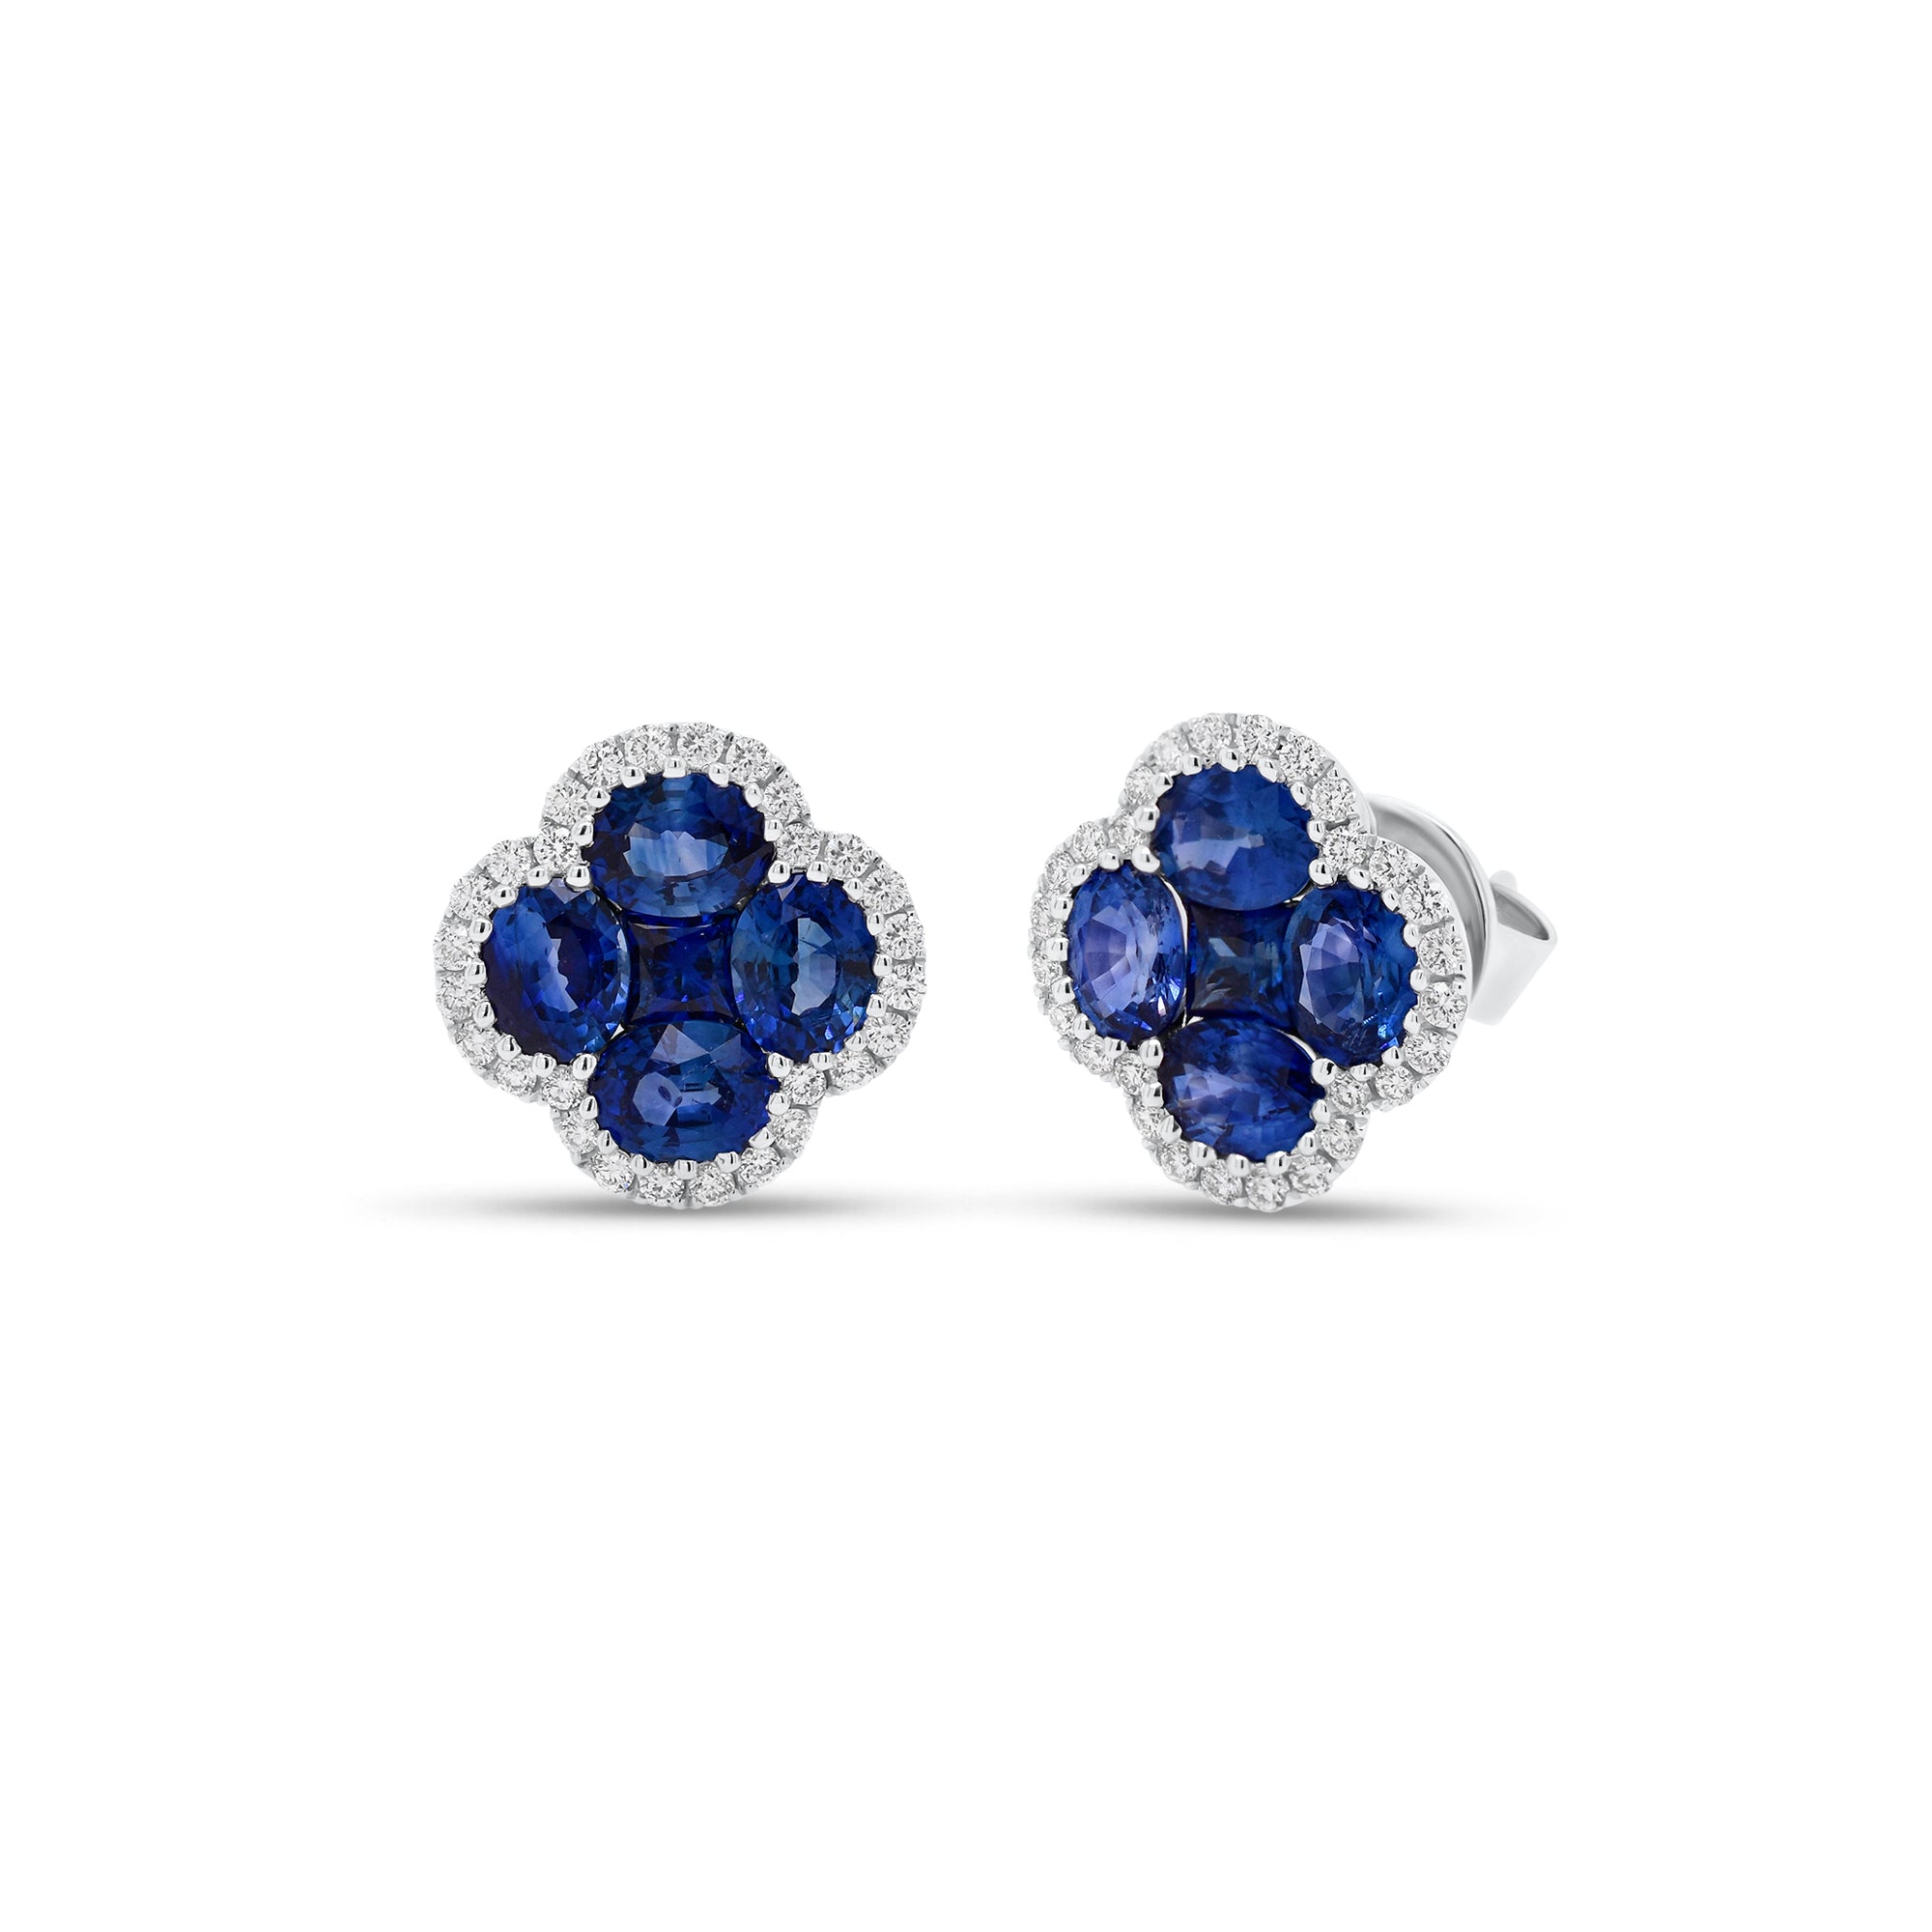 sapphire & diamond flower stud earrings - 18K gold weighing 3.37 grams  - 8 oval-shaped sapphires totaling 2.40 carats  - 2 princess-cut sapphires totaling 0.34 carats  - 56 round diamonds totaling 0.28 carats